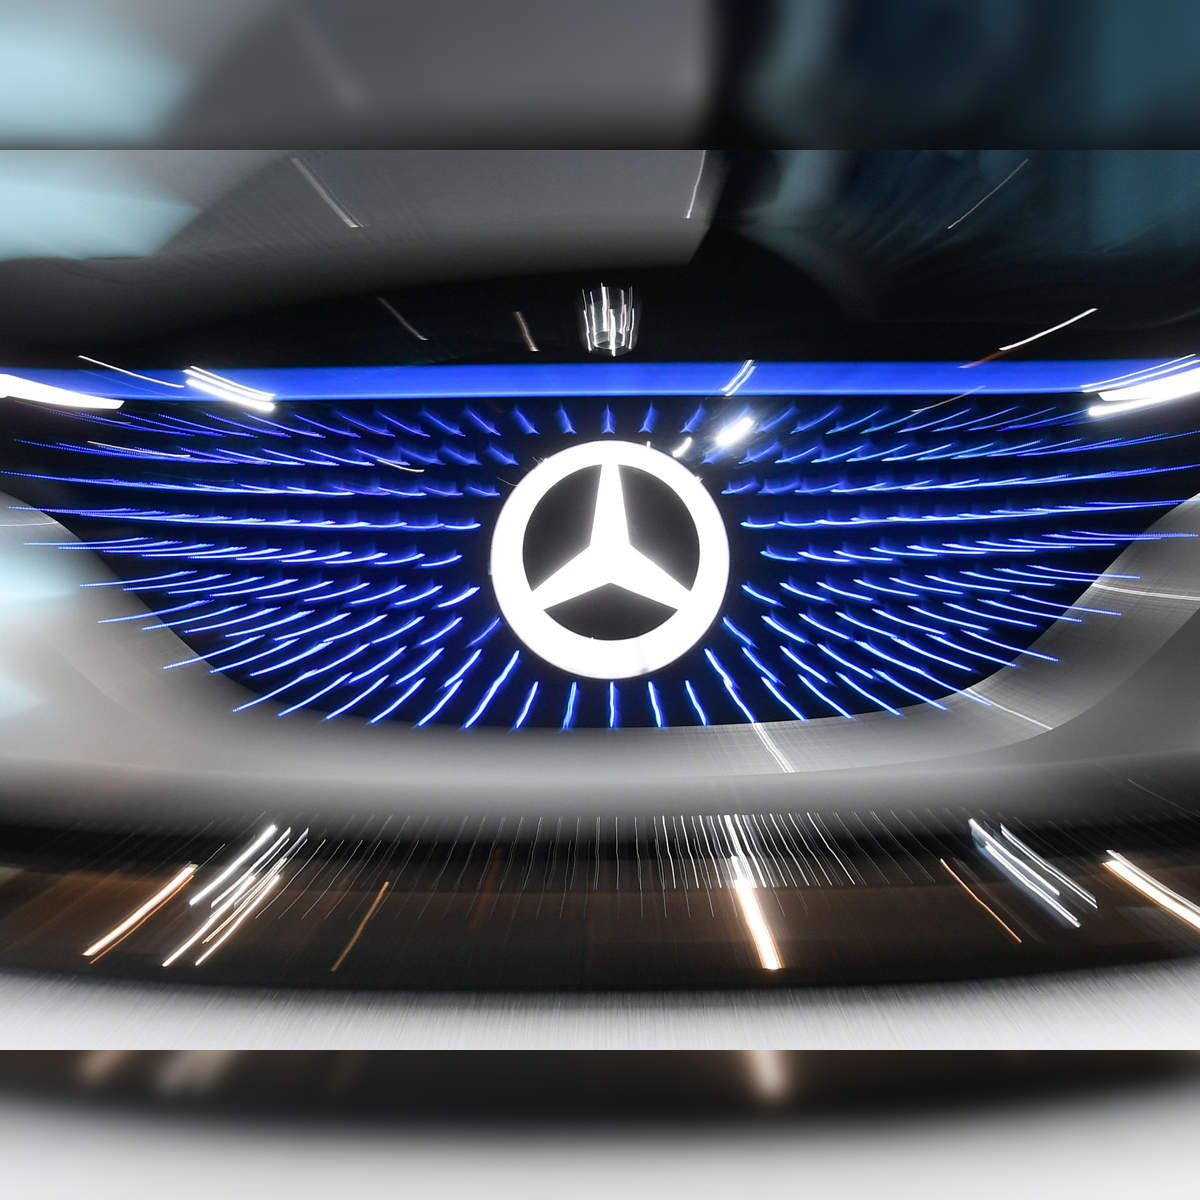 Mercedes-Benz India: 2020 to be a big year for Mercedes-Benz; auto company  plans to launch 10 luxury cars in India - The Economic Times